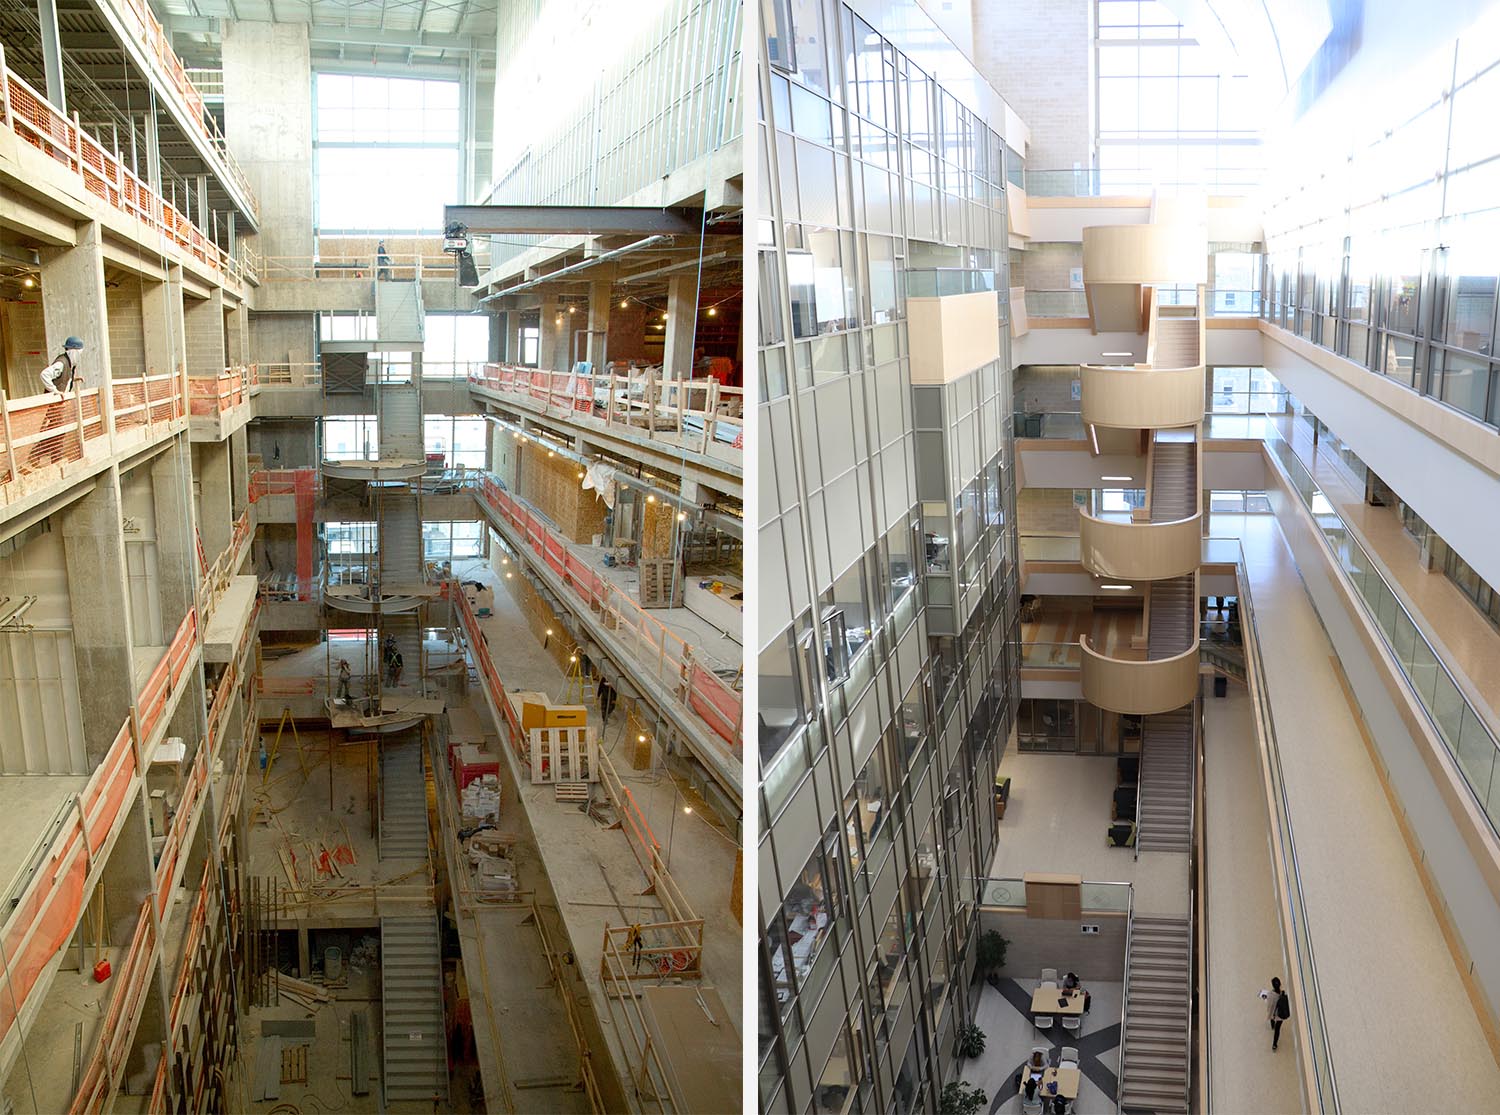 The USask Health Sciences D-Wing during construction in 2011 (left) and after.